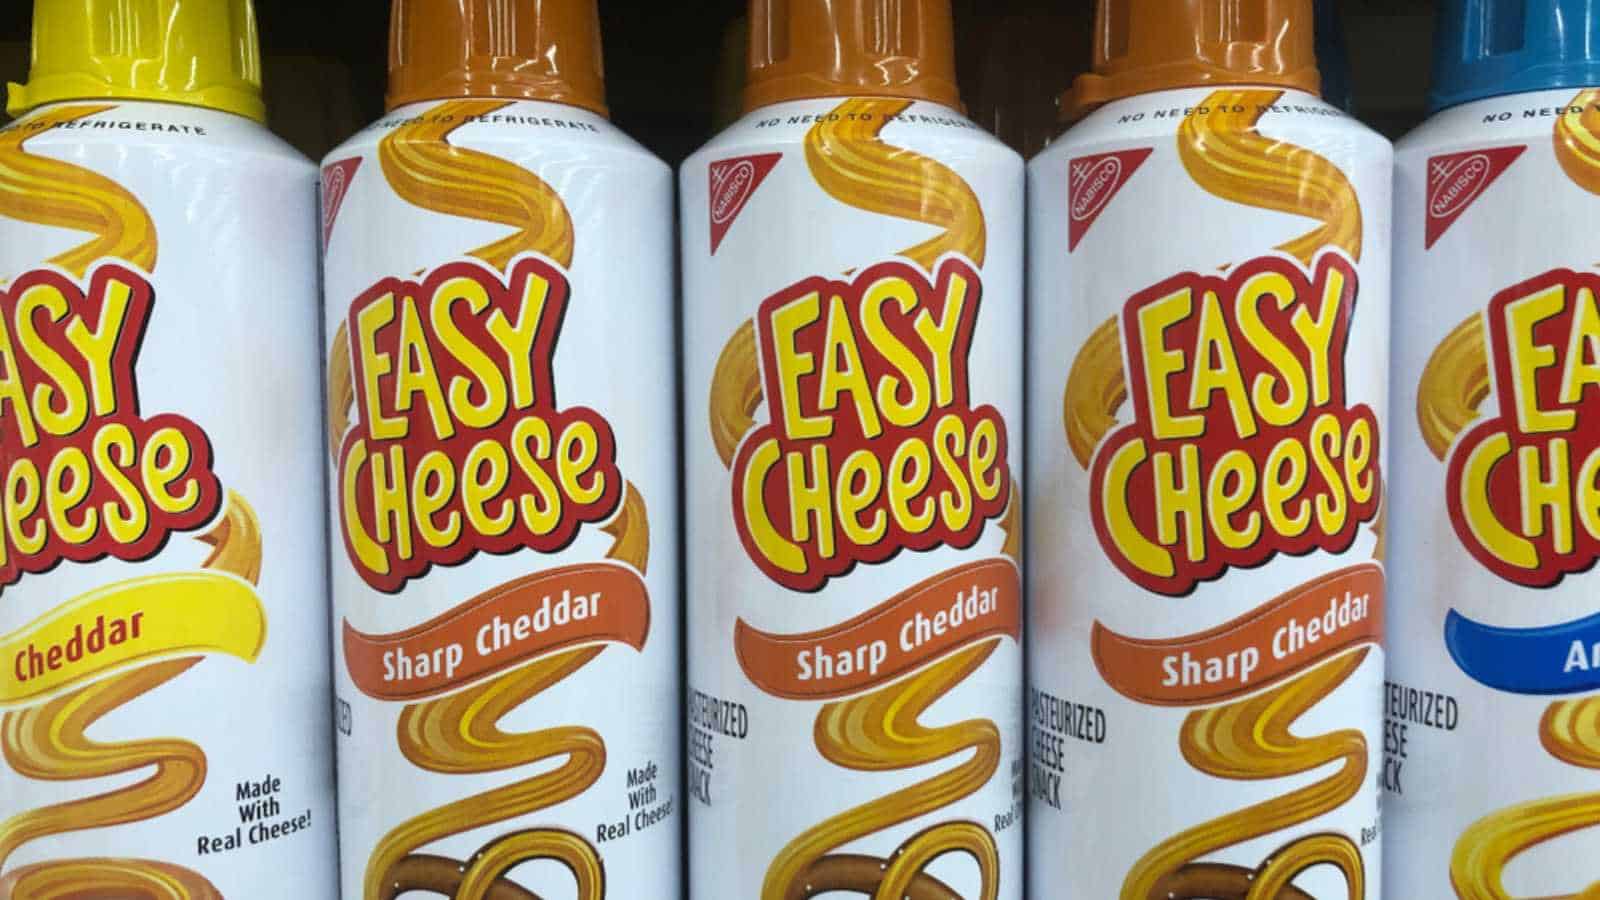 March 13, 2019: Minneapolis, MN: Cans of Nabisco easy cheese in various flavors on a grocery store shelf.
